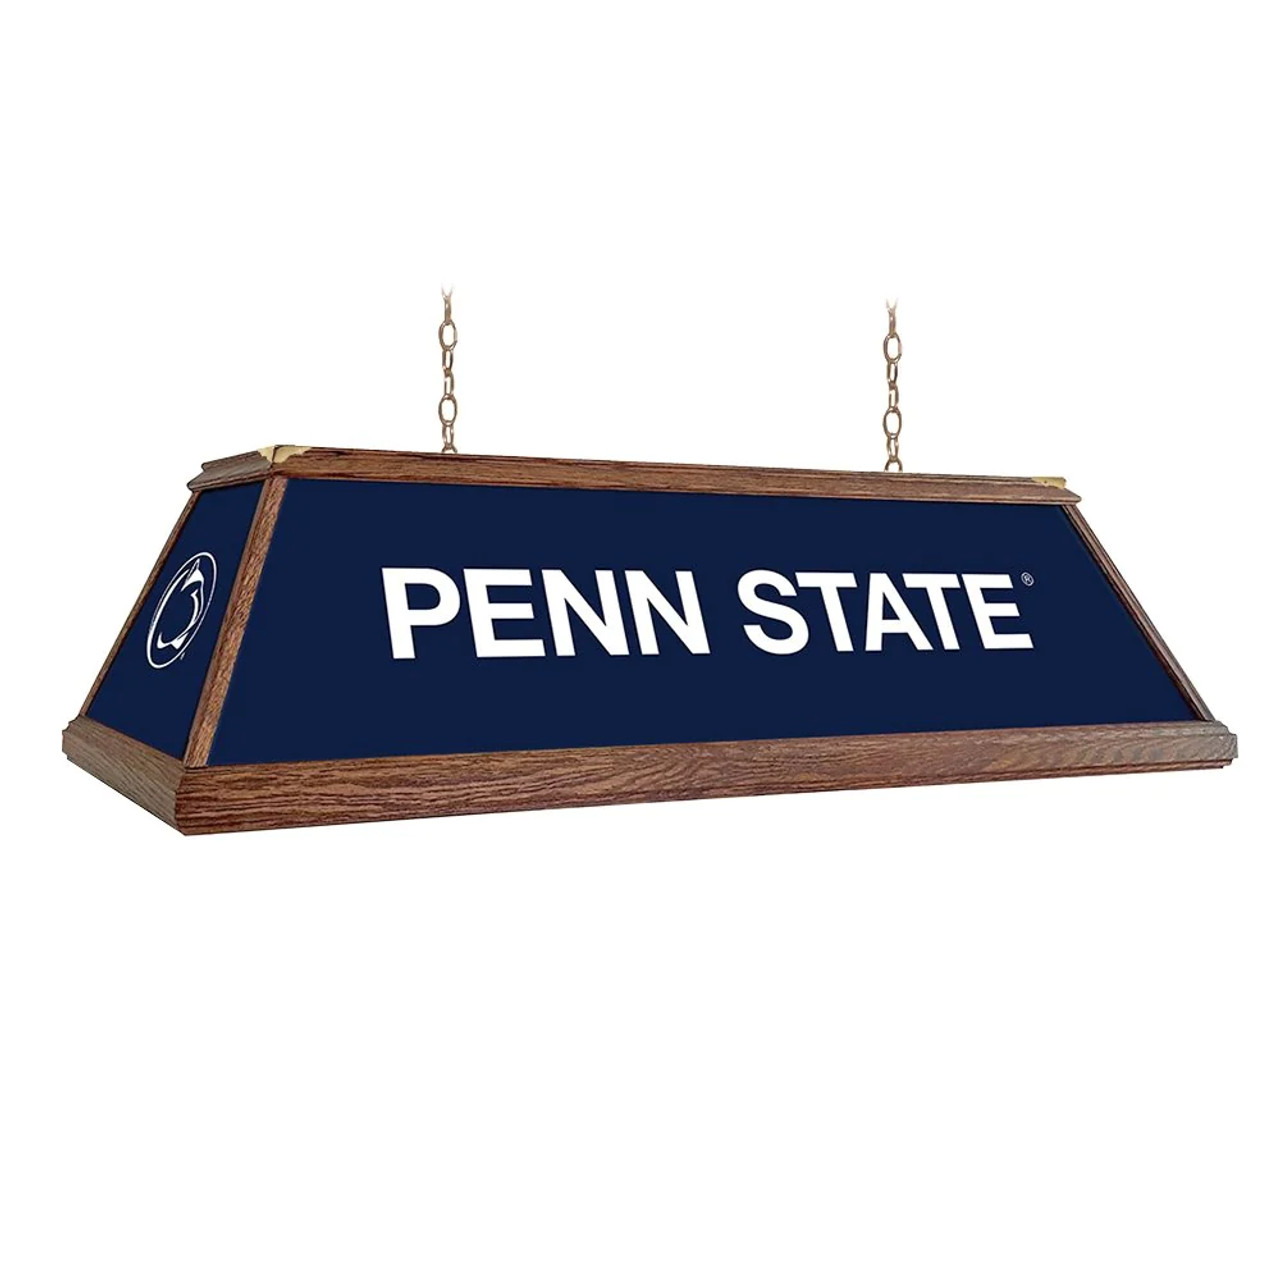 Penn State, PSU, Nittany, Lions, Premium, Wood, Billiard, Pool, Table, Light, Lamp, NCPNST-330-01A, NCPNST-330-01B, The Fan-Brand, 689481024462